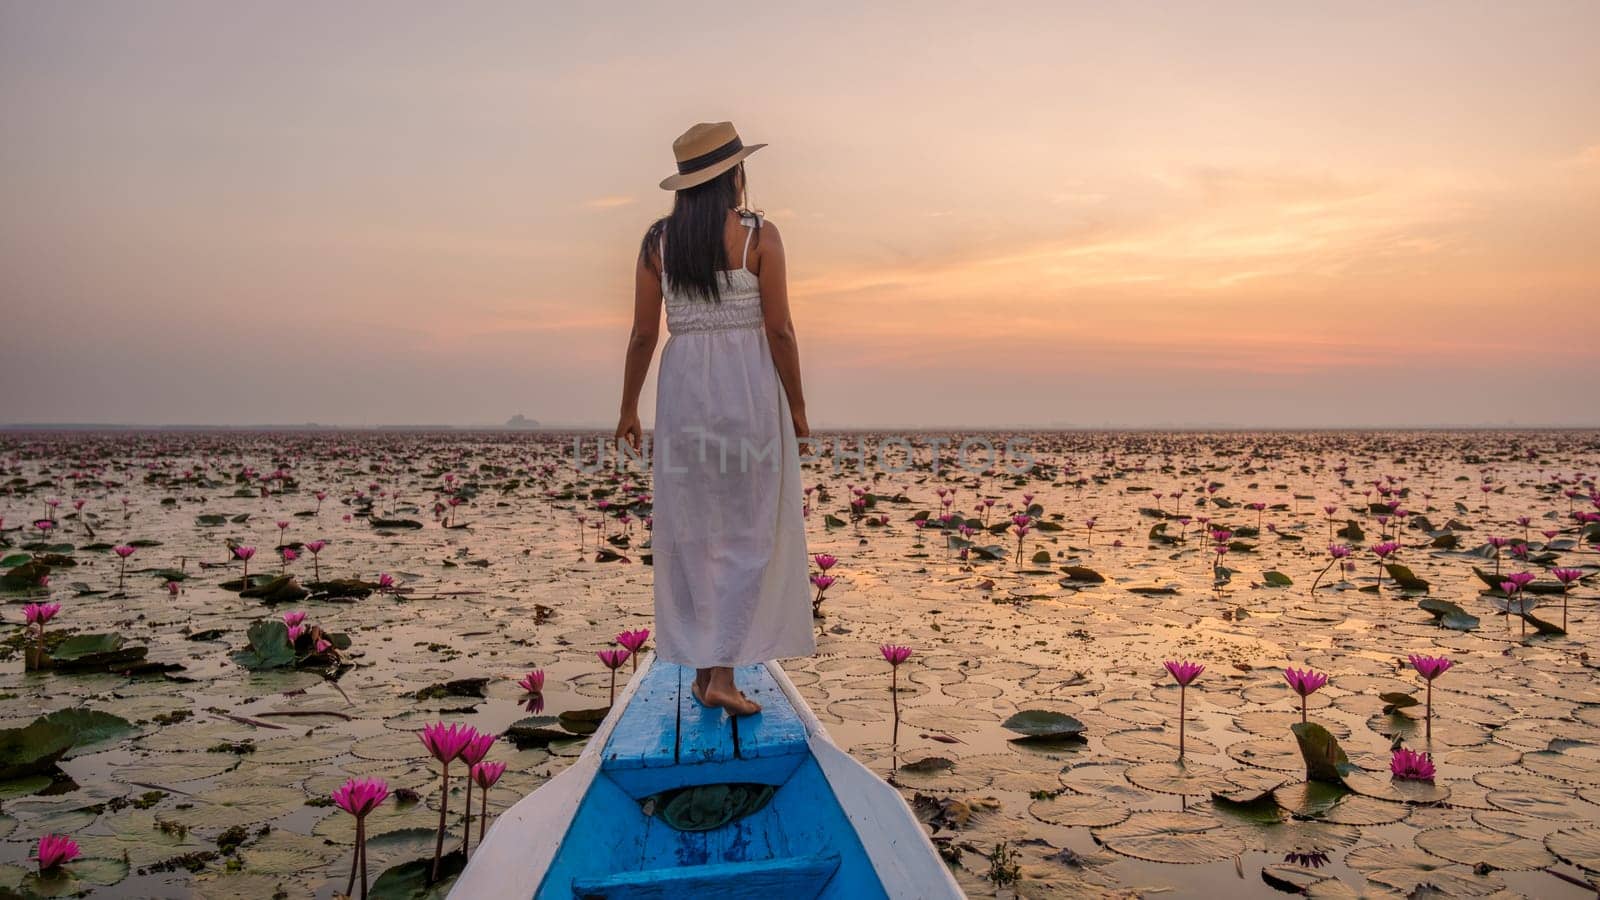 The sea of red lotus, Lake Nong Harn, Udon Thani, Thailand by fokkebok